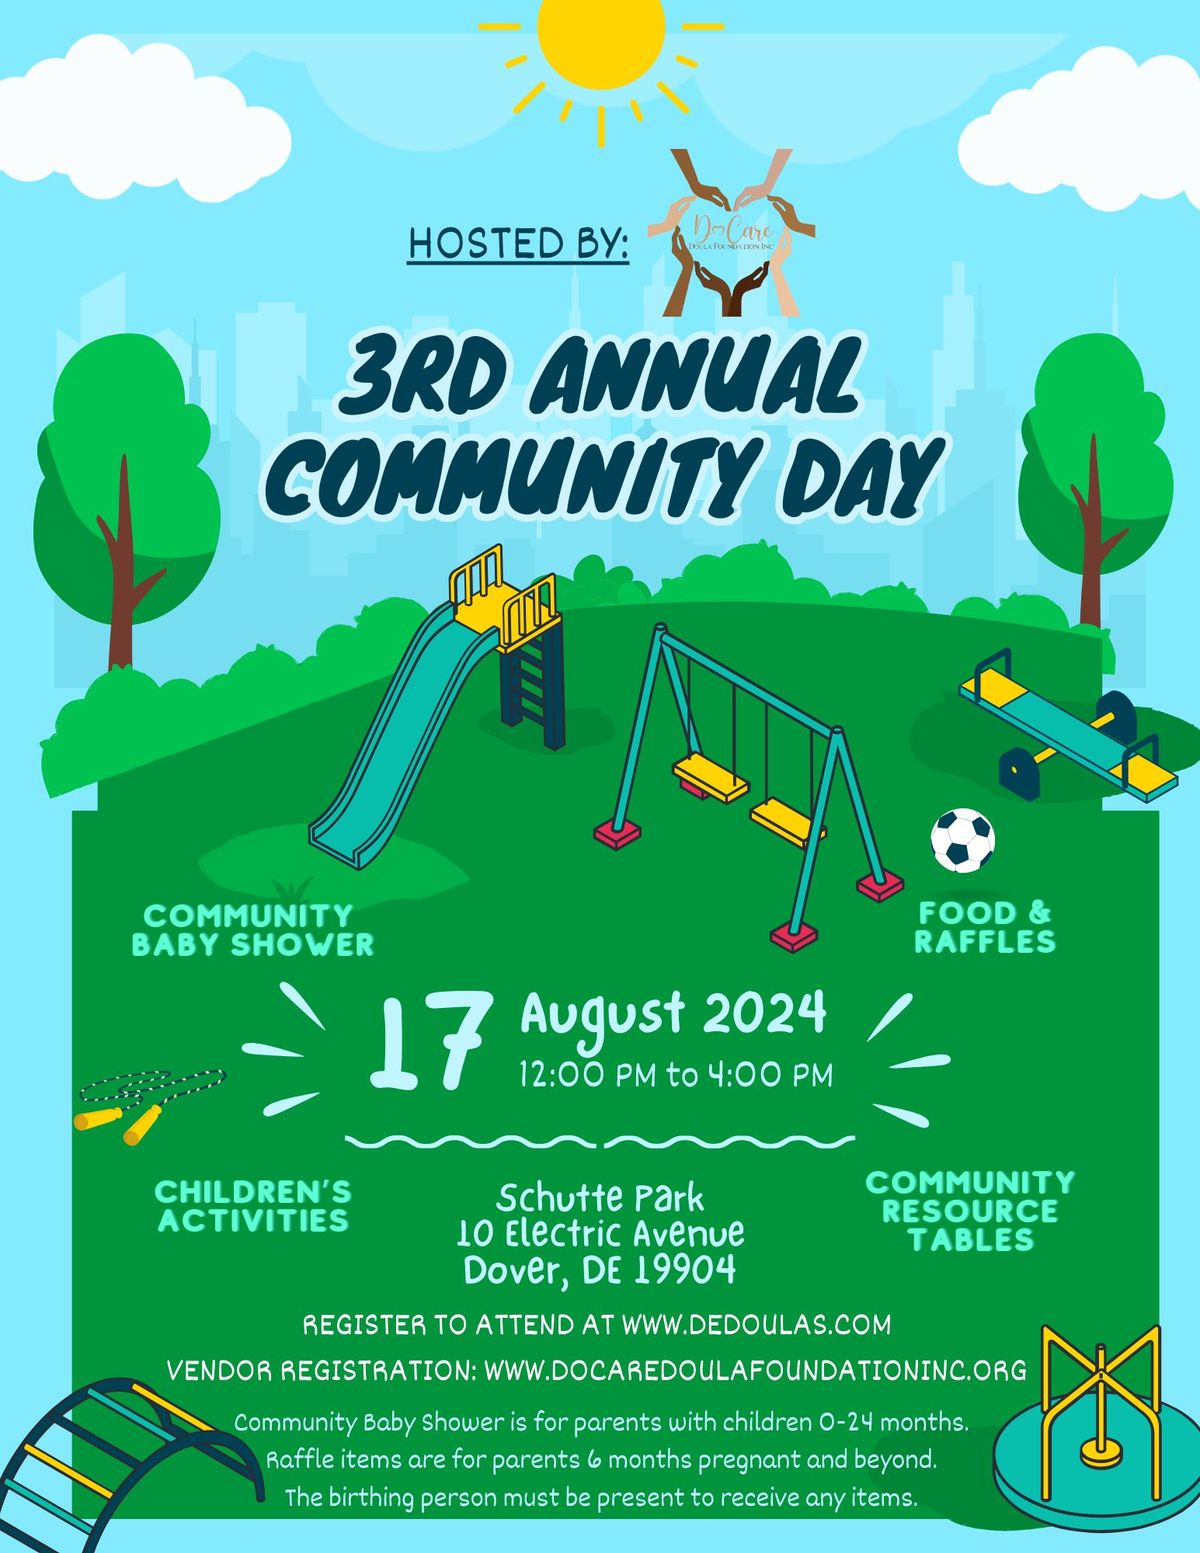 3rd Annual Community Day